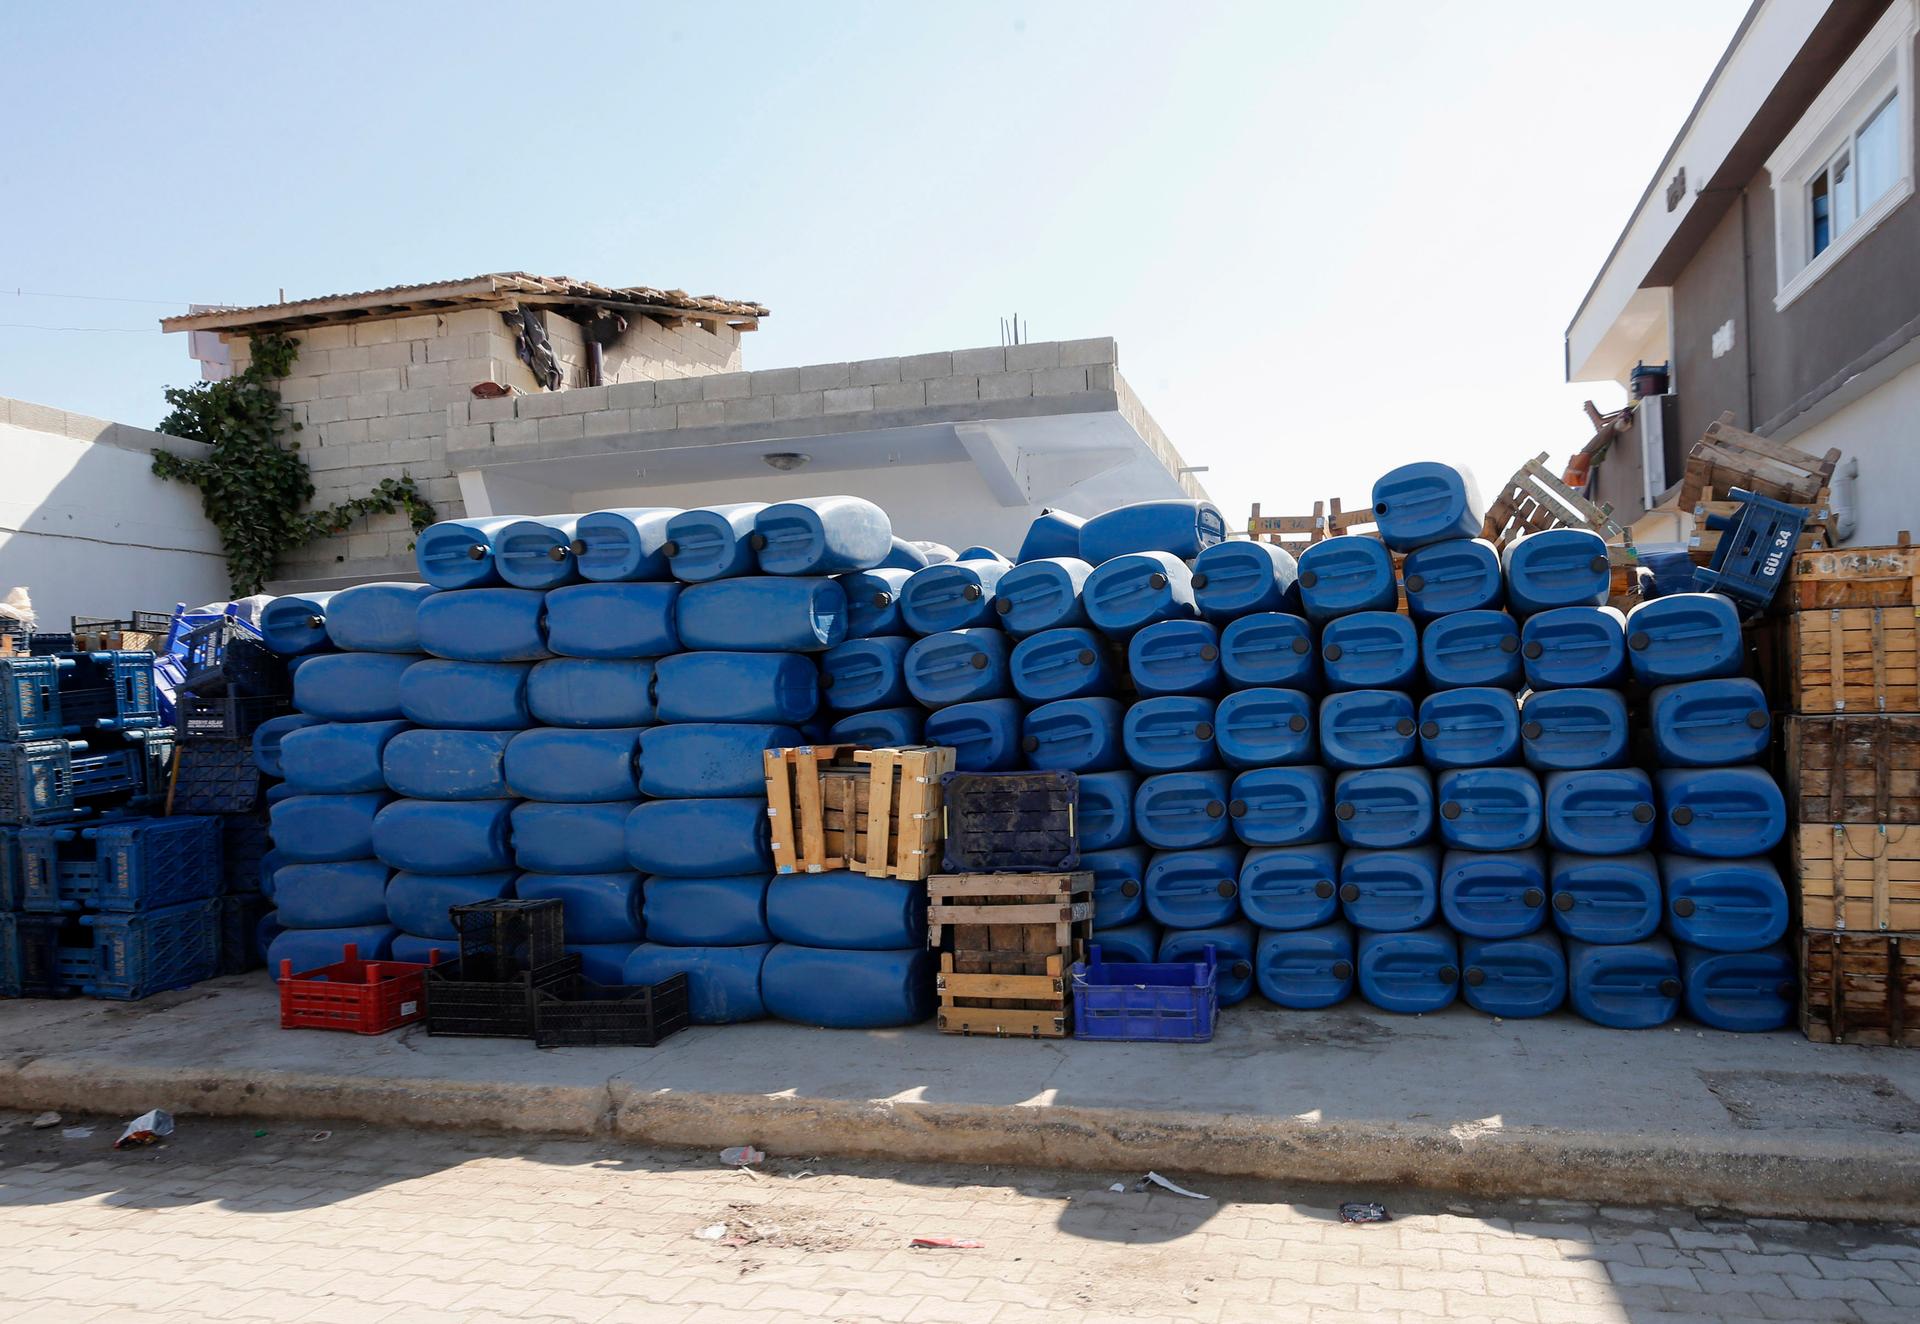 Blue jerry cans, usually used by smugglers ferrying oil from Syria to Turkey, are stacked for sale in front of a shop in the Turkish border town of Hacipasa.